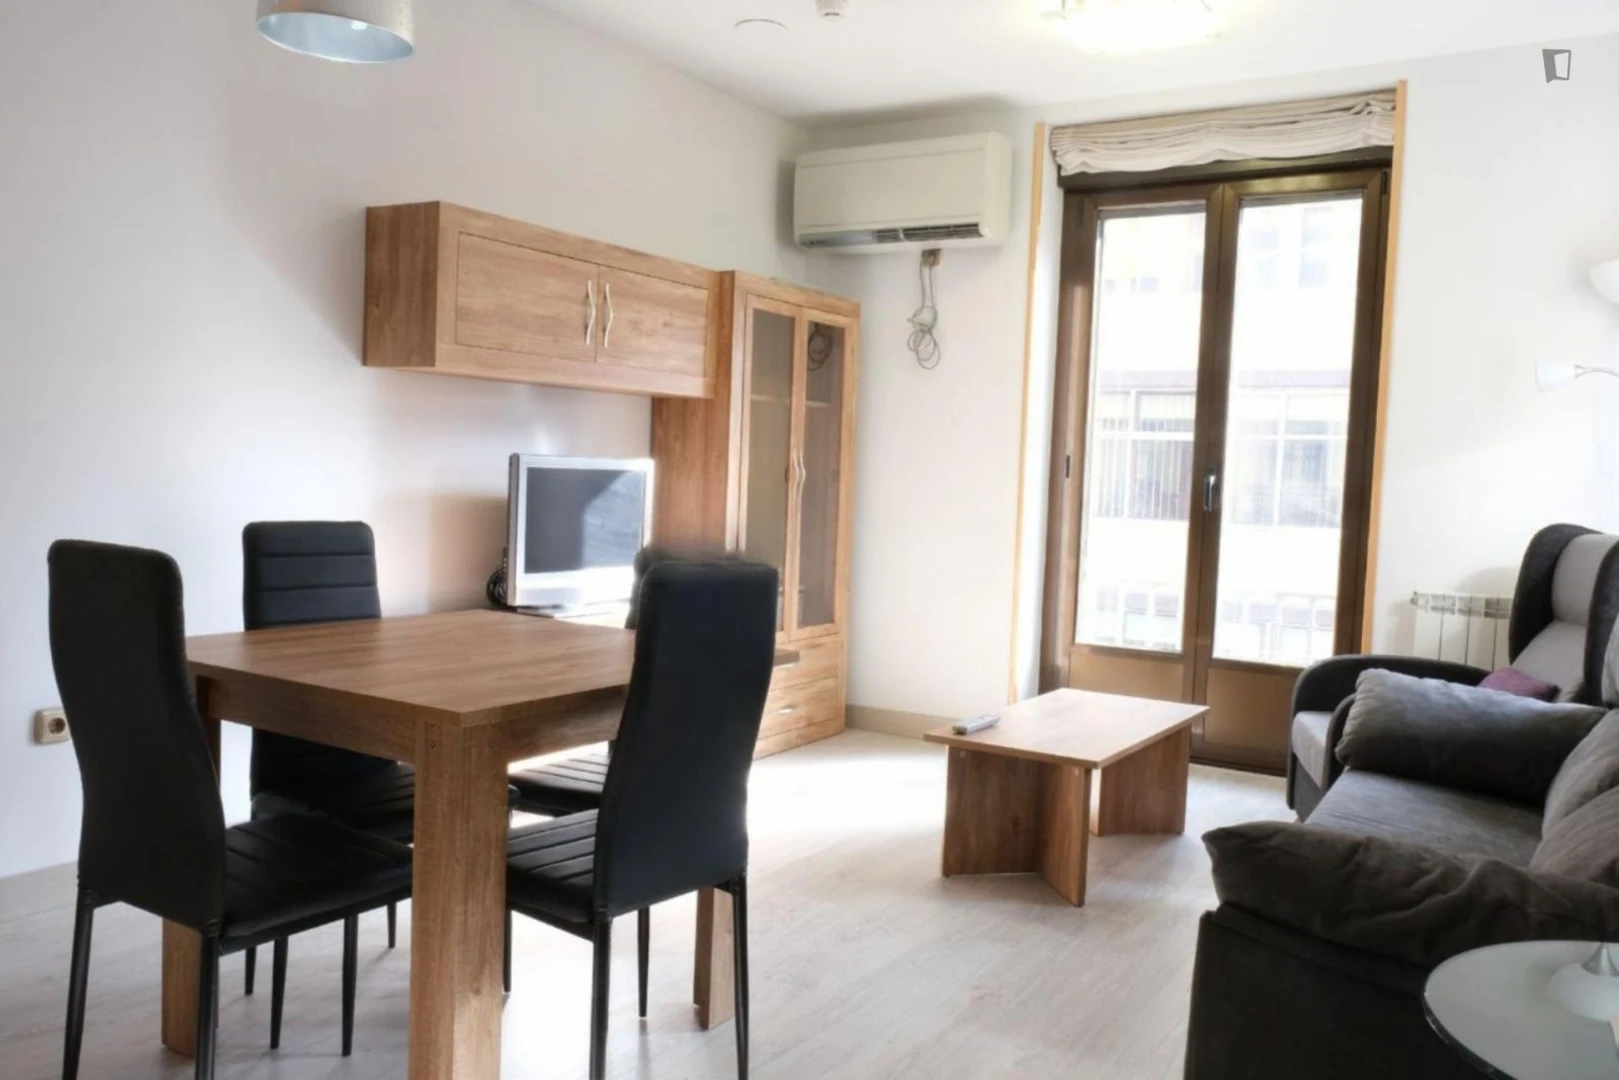 Accommodation in the centre of salamanca